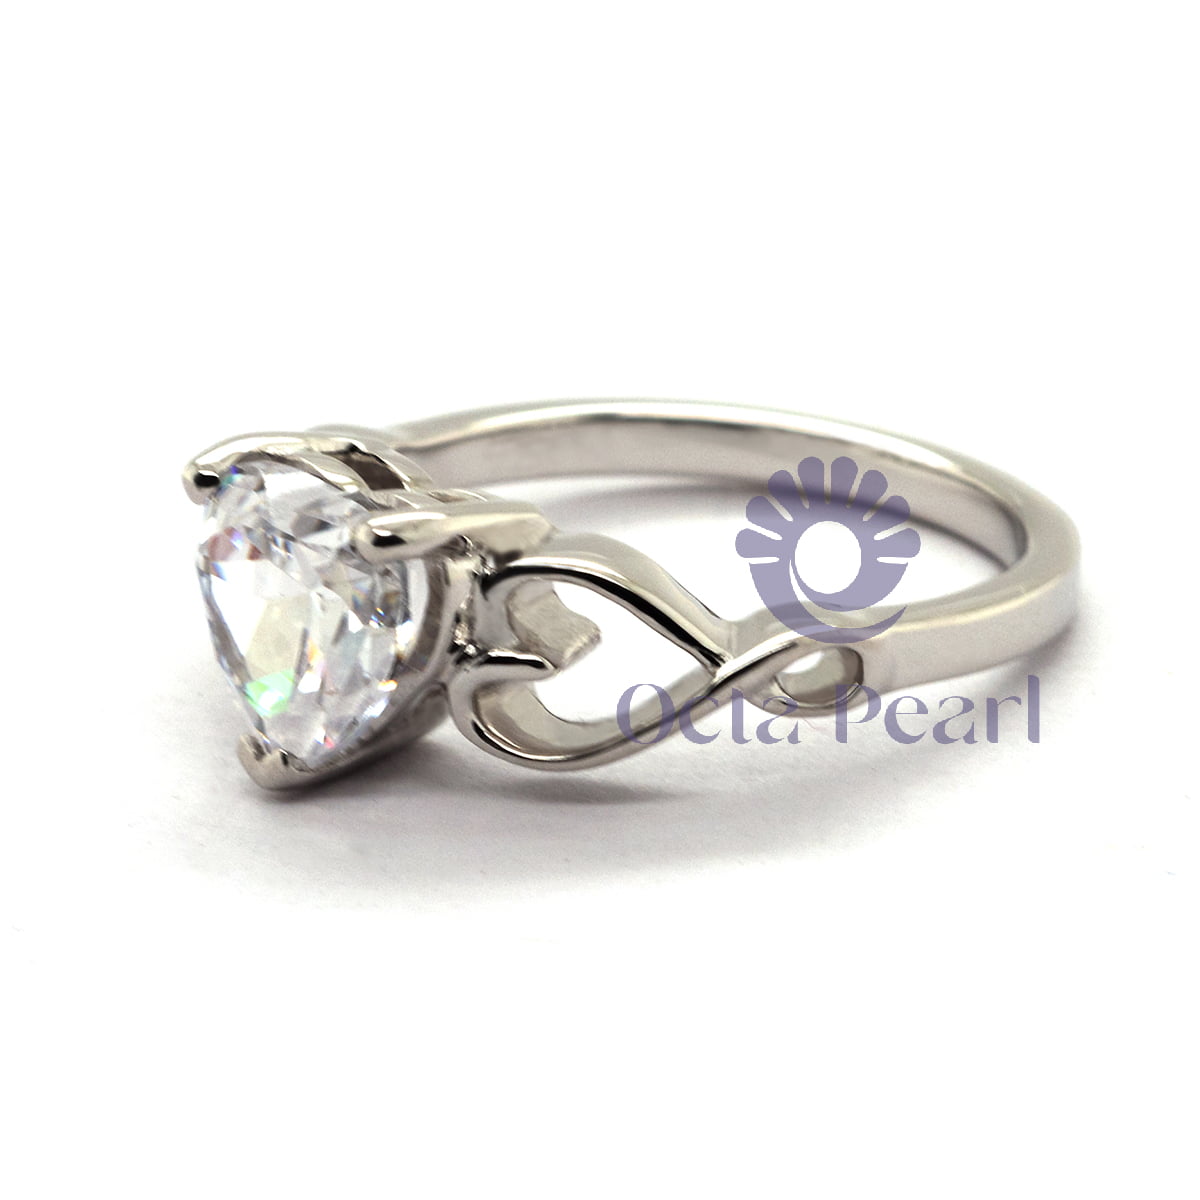 Heart Shape CZ Stone Solitaire Engagement Wedding Ring